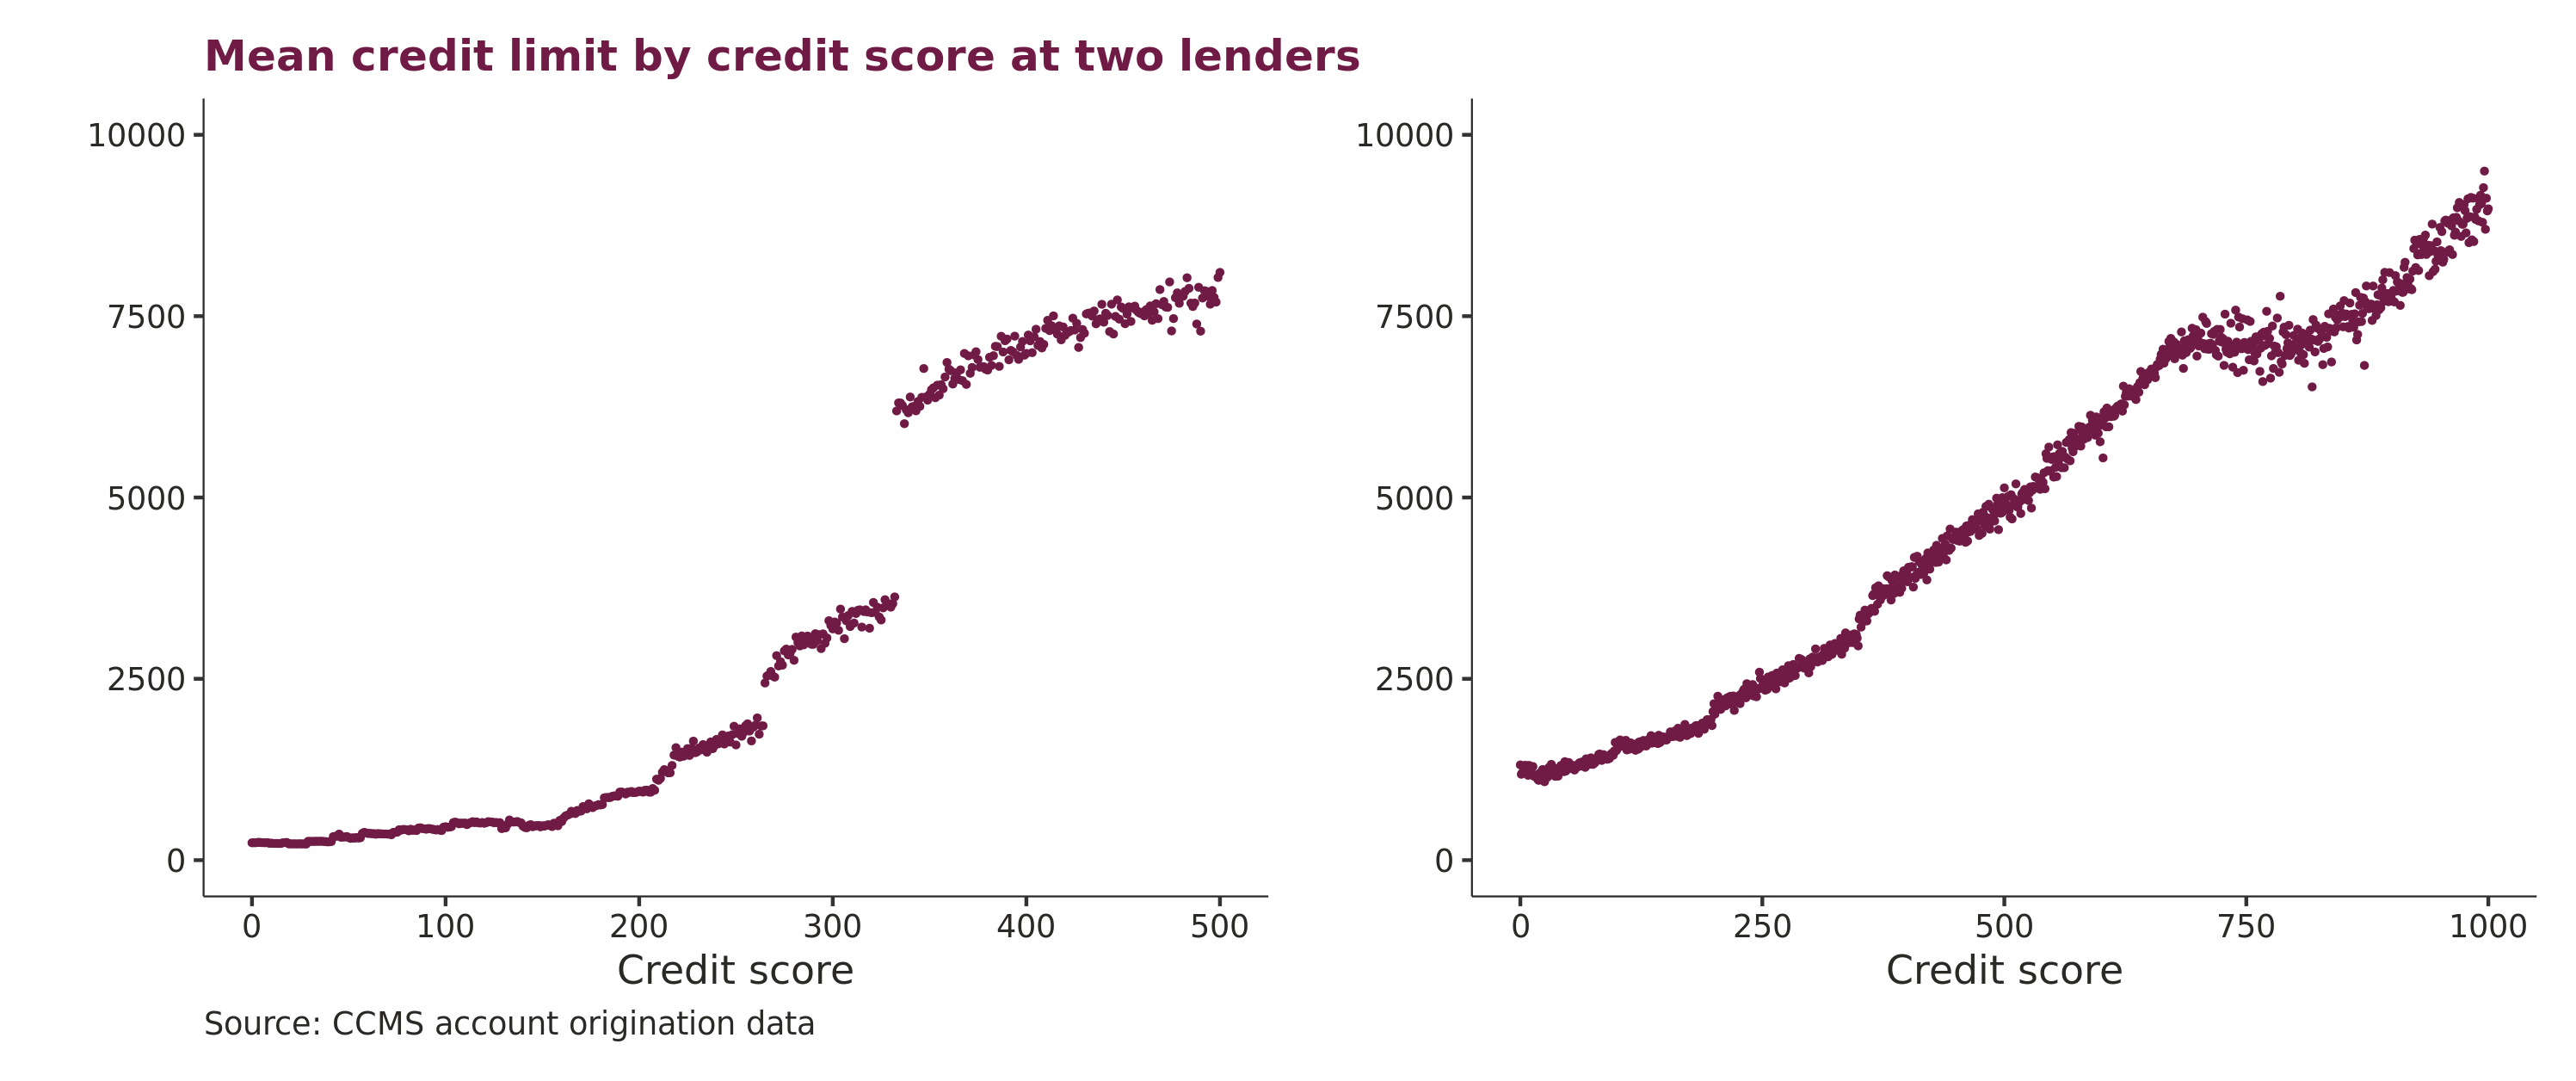 Mean credit limit by credit score at two lenders